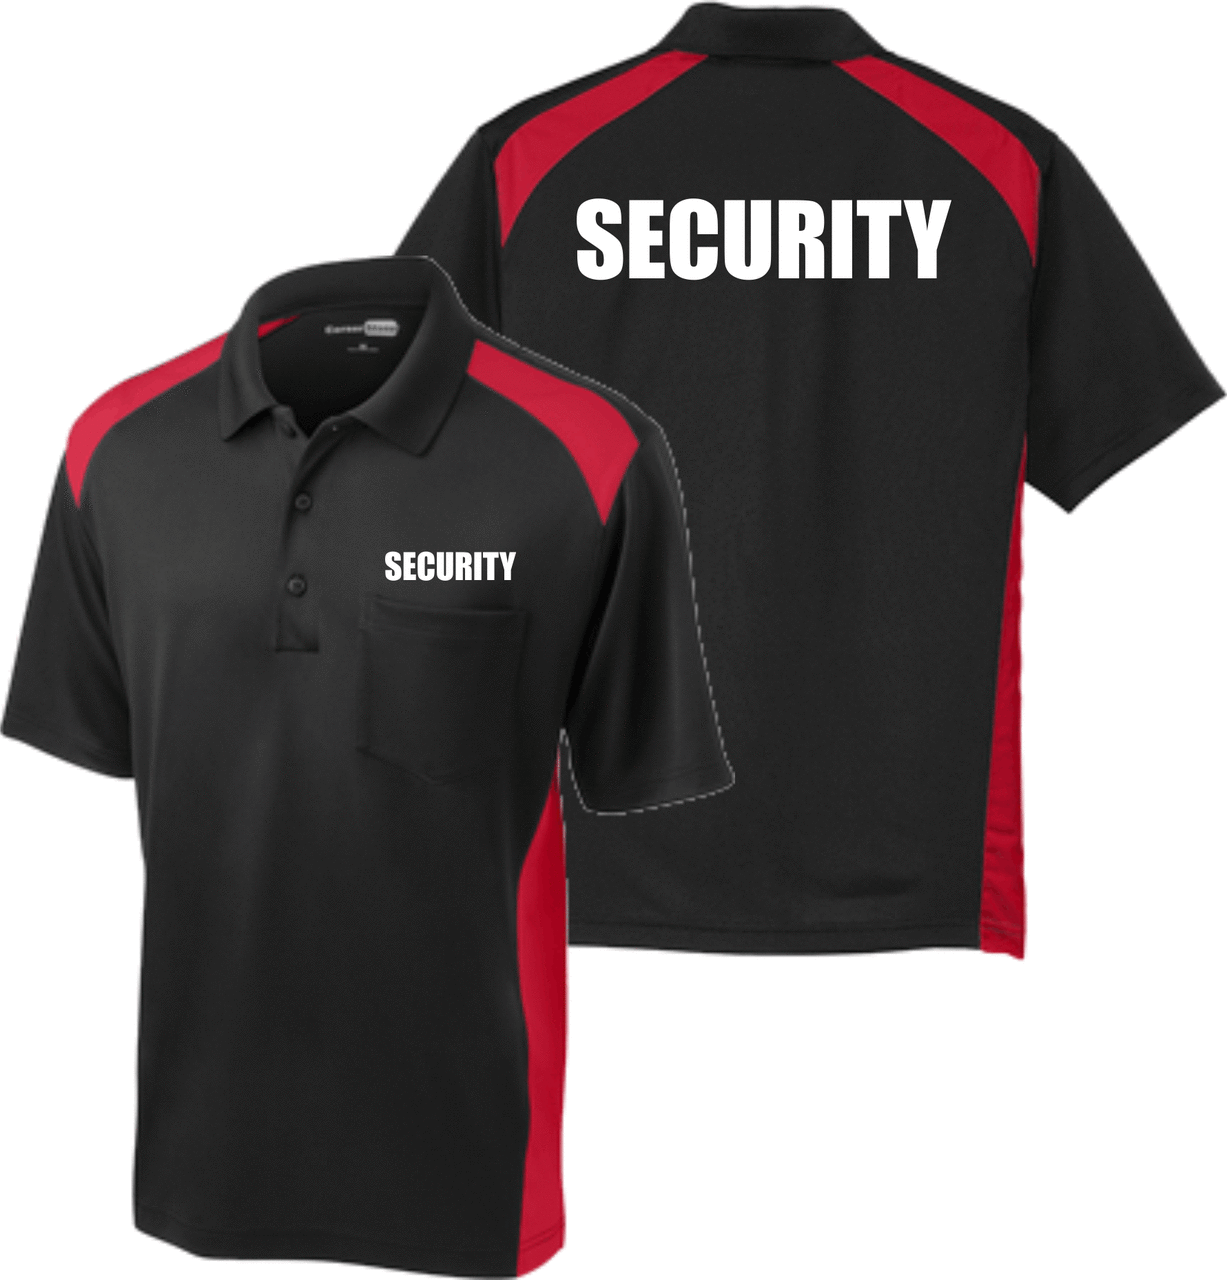 CS416 Black REd Security two tone Pocket Polo Snag Proof